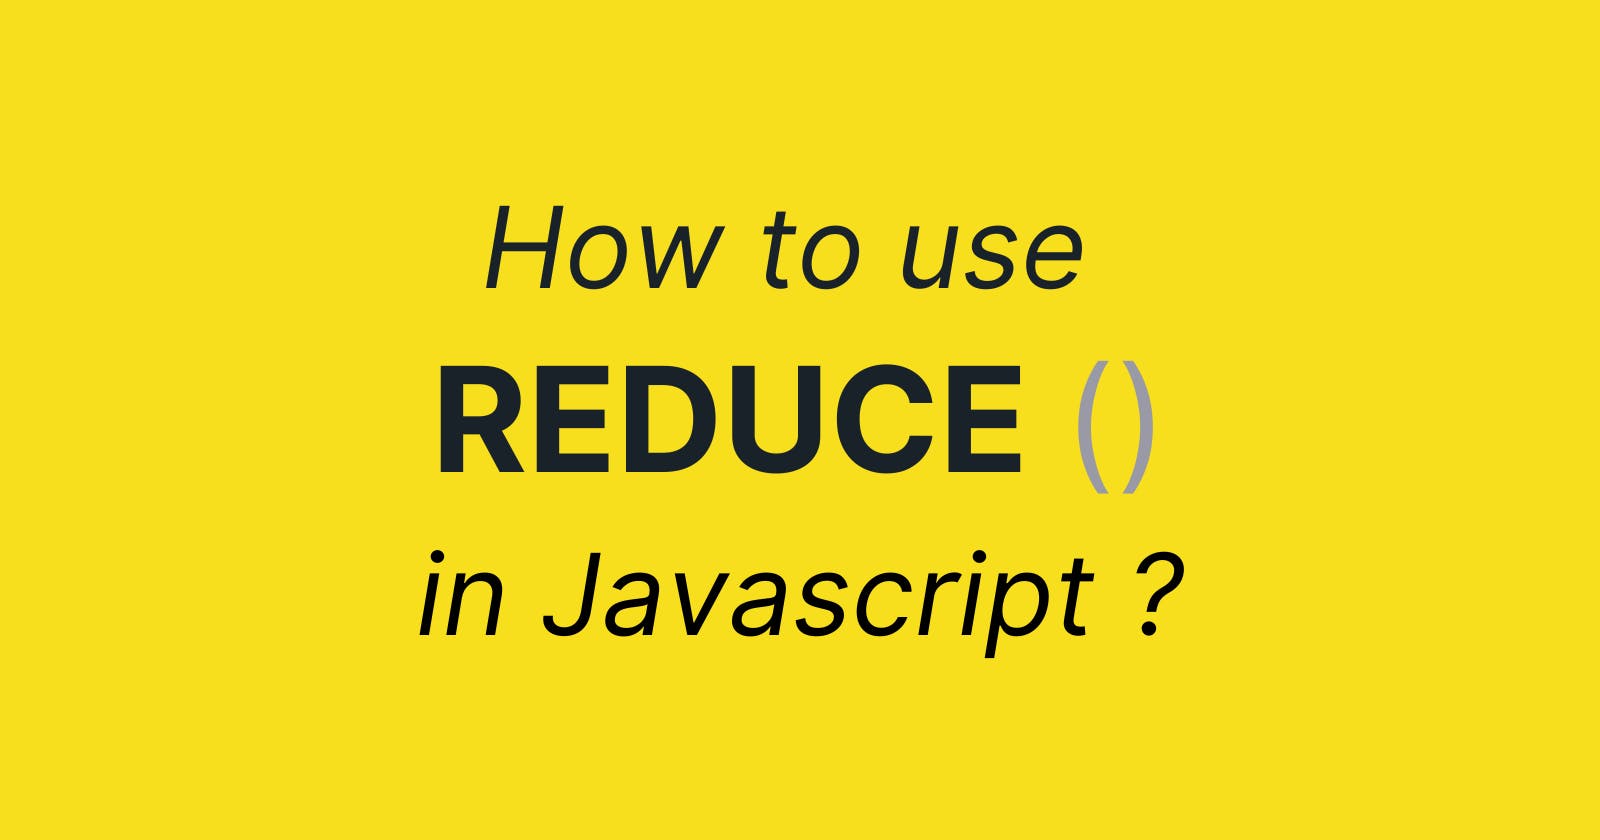 How to use Reduce in JavaScript?